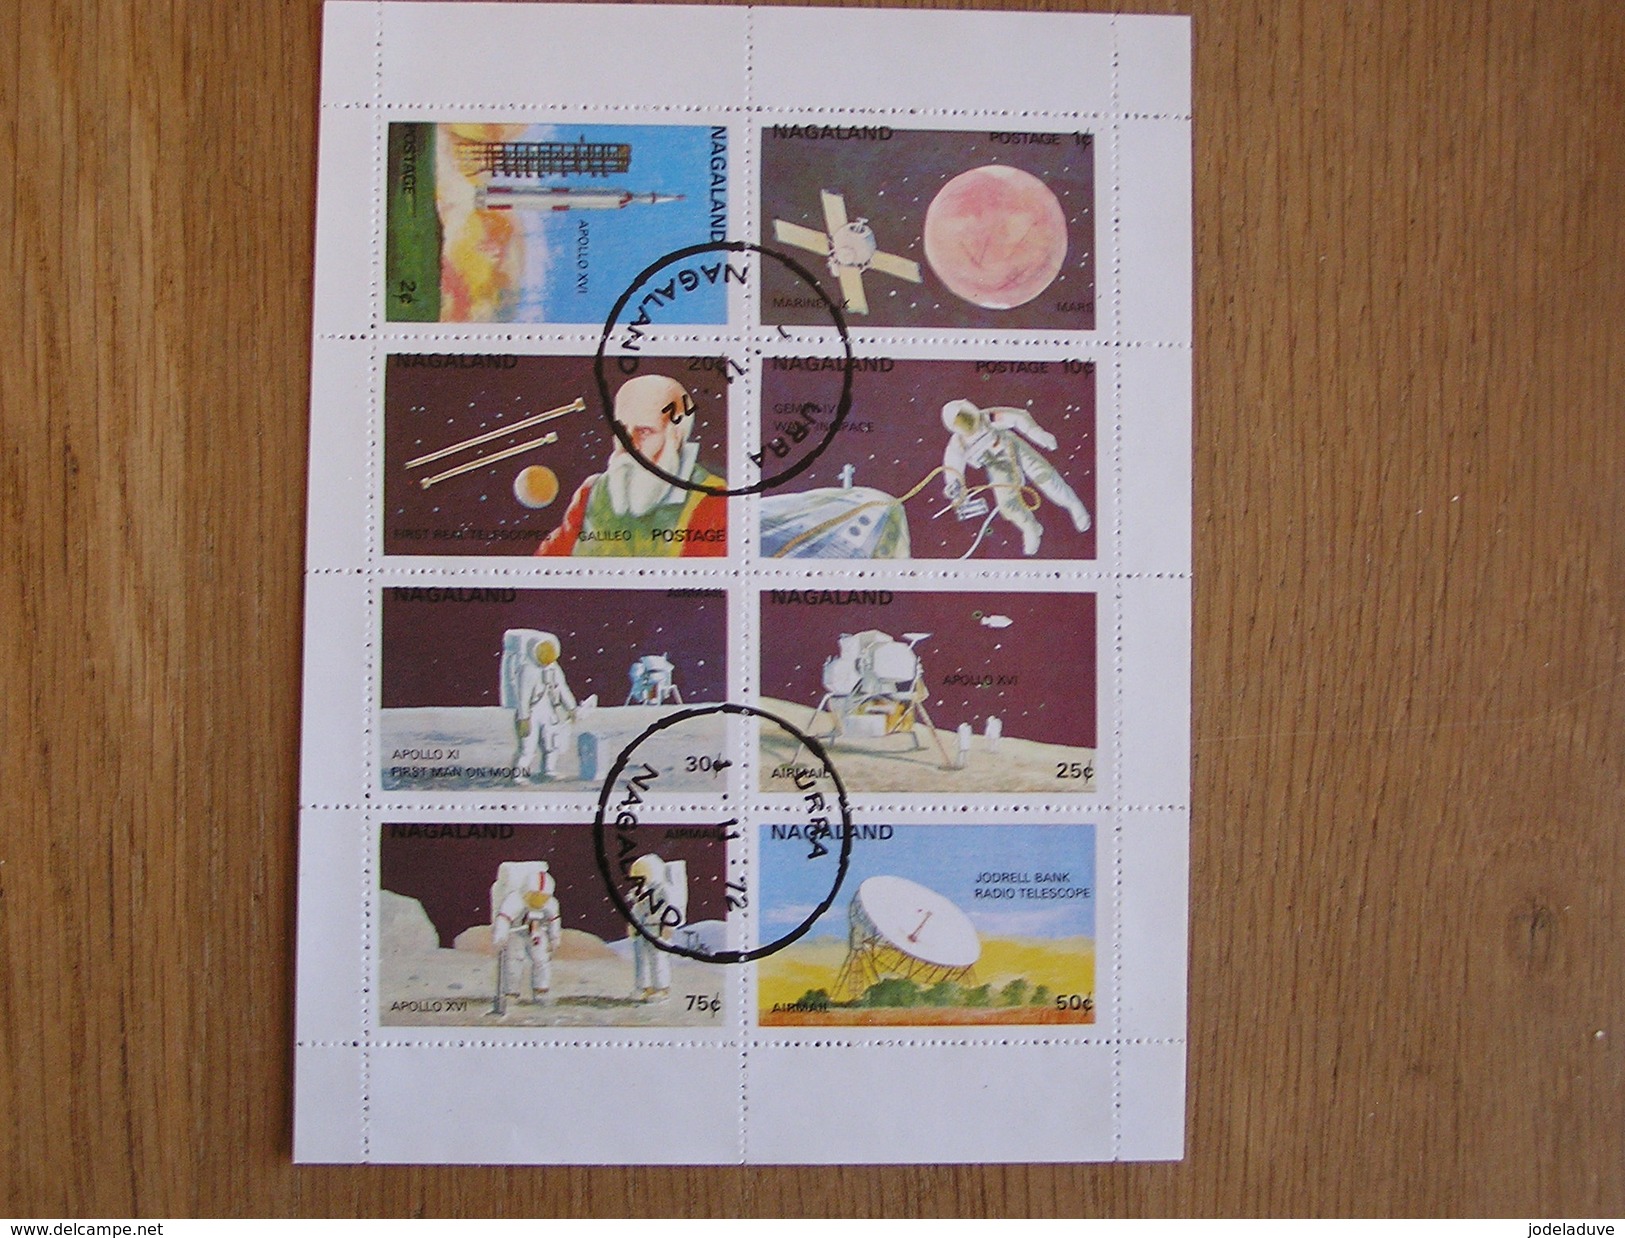 NAGALAND  Espace Space Astronautique Engin Spatial Apollo Lune Sheet Stamp Bloc Timbres - Asia (Other)